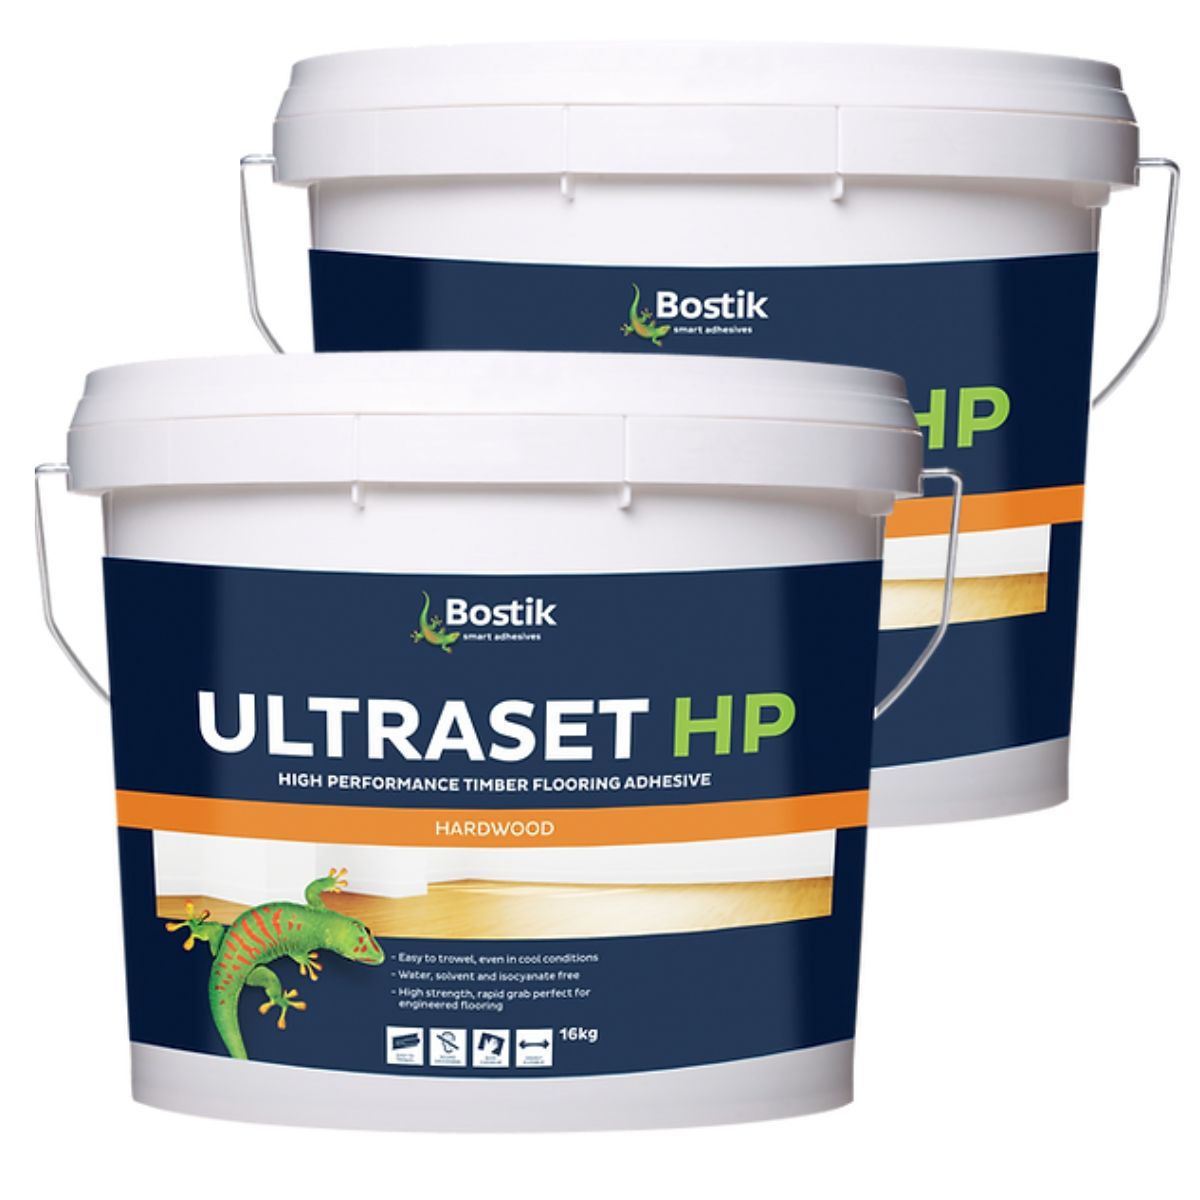 (2 Buckets) BOSTIK 16KG ADHESIVE HP PAIL BROWN ULTRASET FLEXIBLE 30840416 - South East Clearance Centre